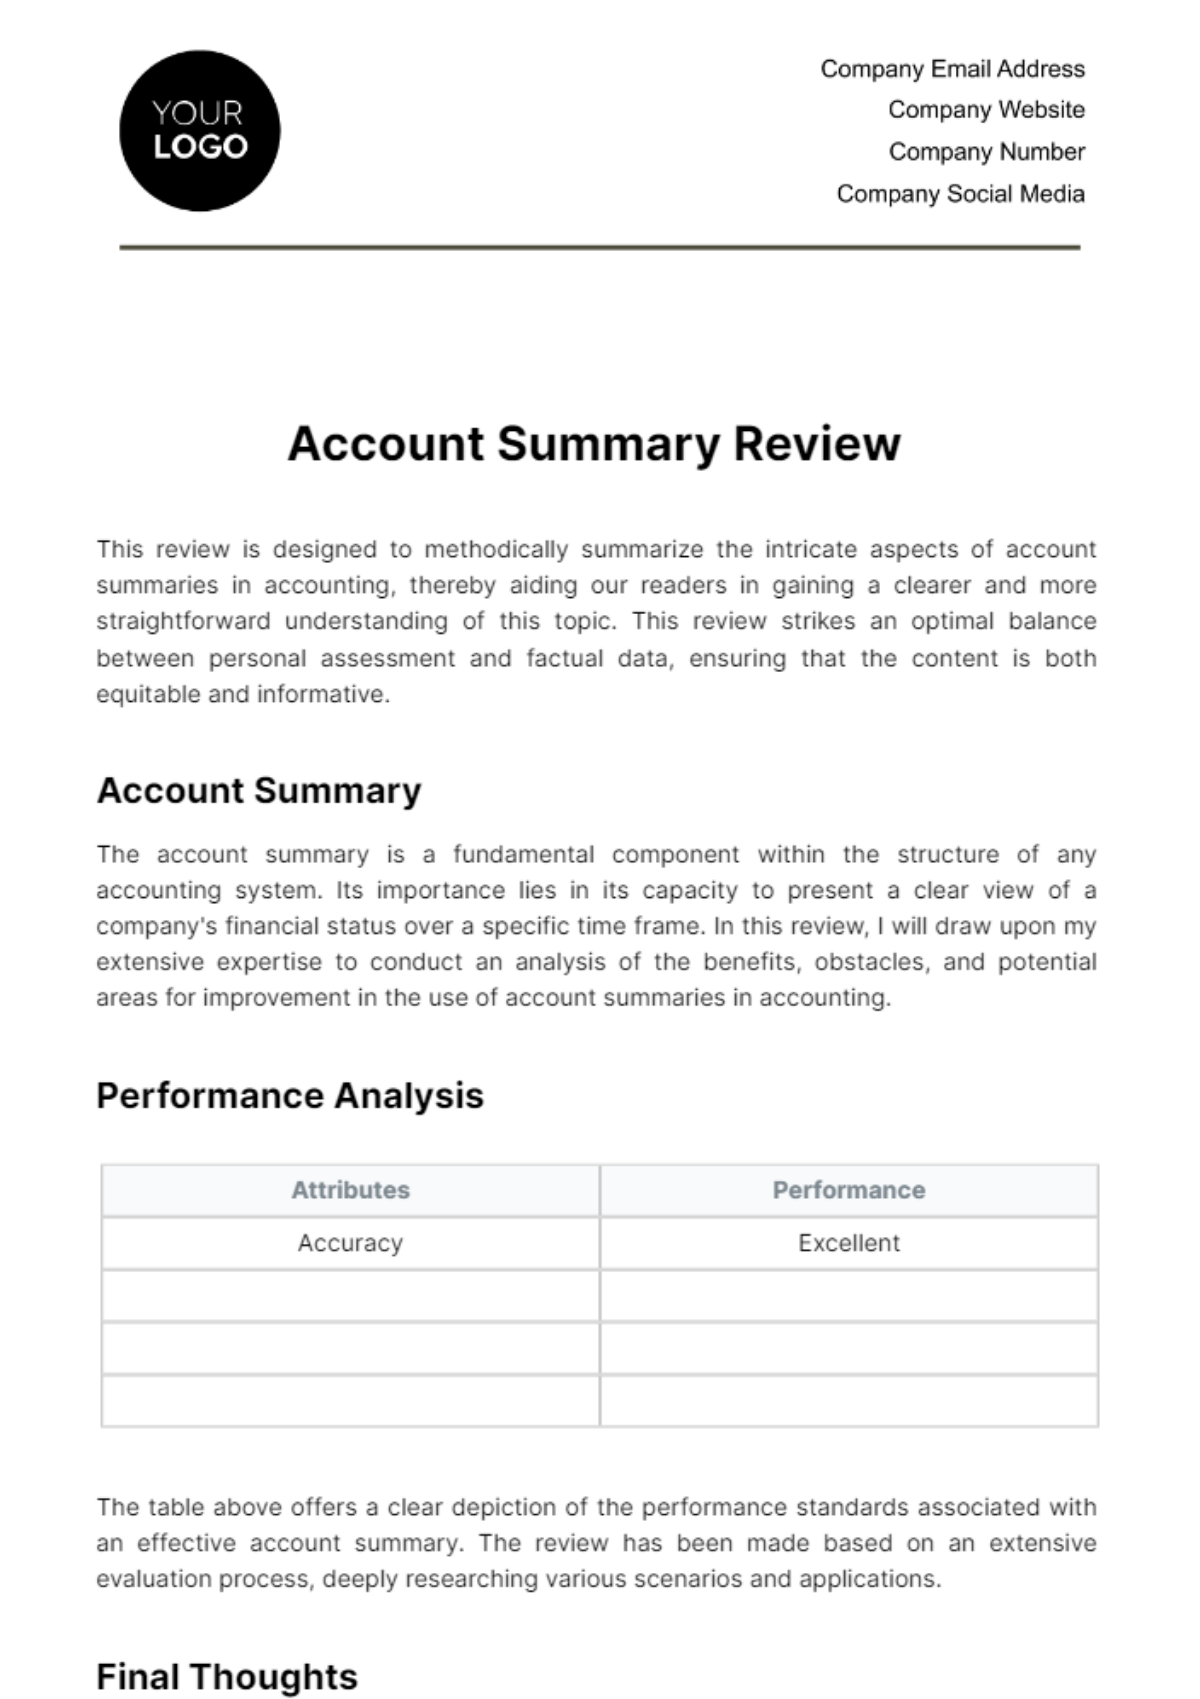 Account Summary Review Template